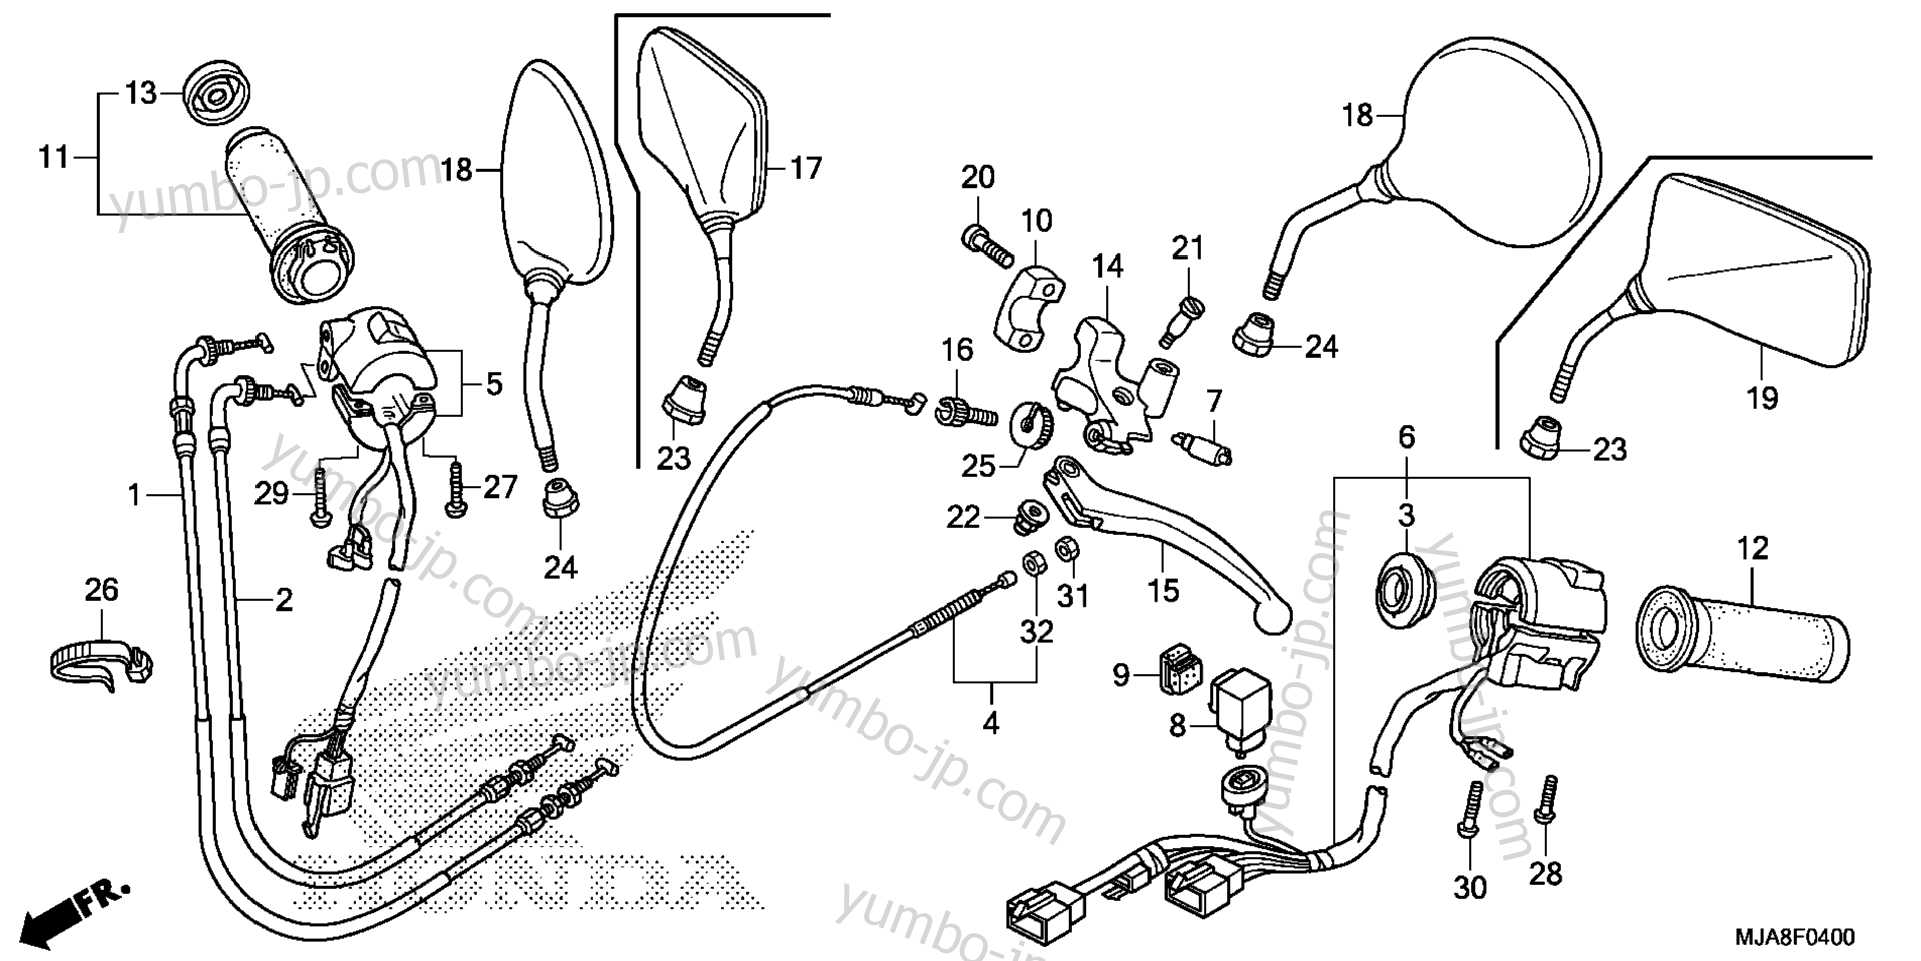 HANDLE LEVER / SWITCH / CABLE for motorcycles HONDA VT750C2S A 2014 year